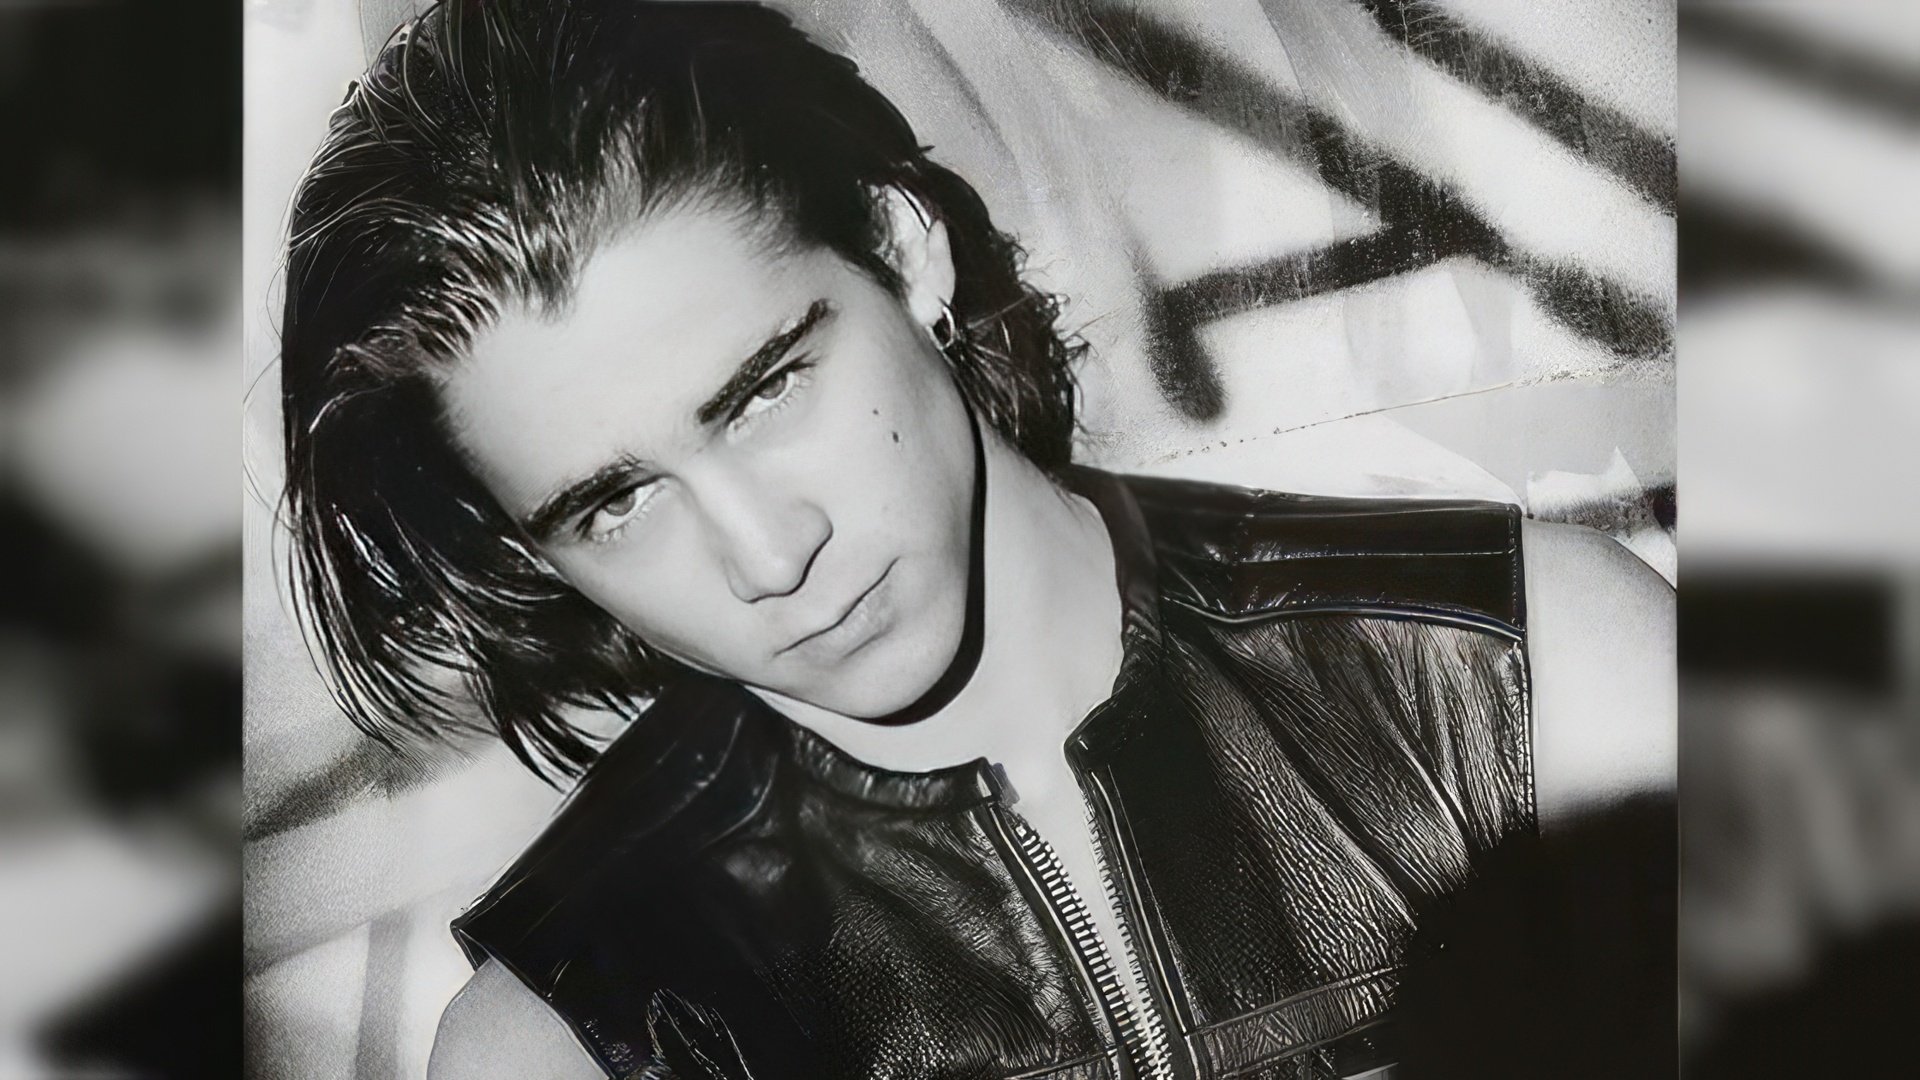 Young Colin Farrell was quite the rebel